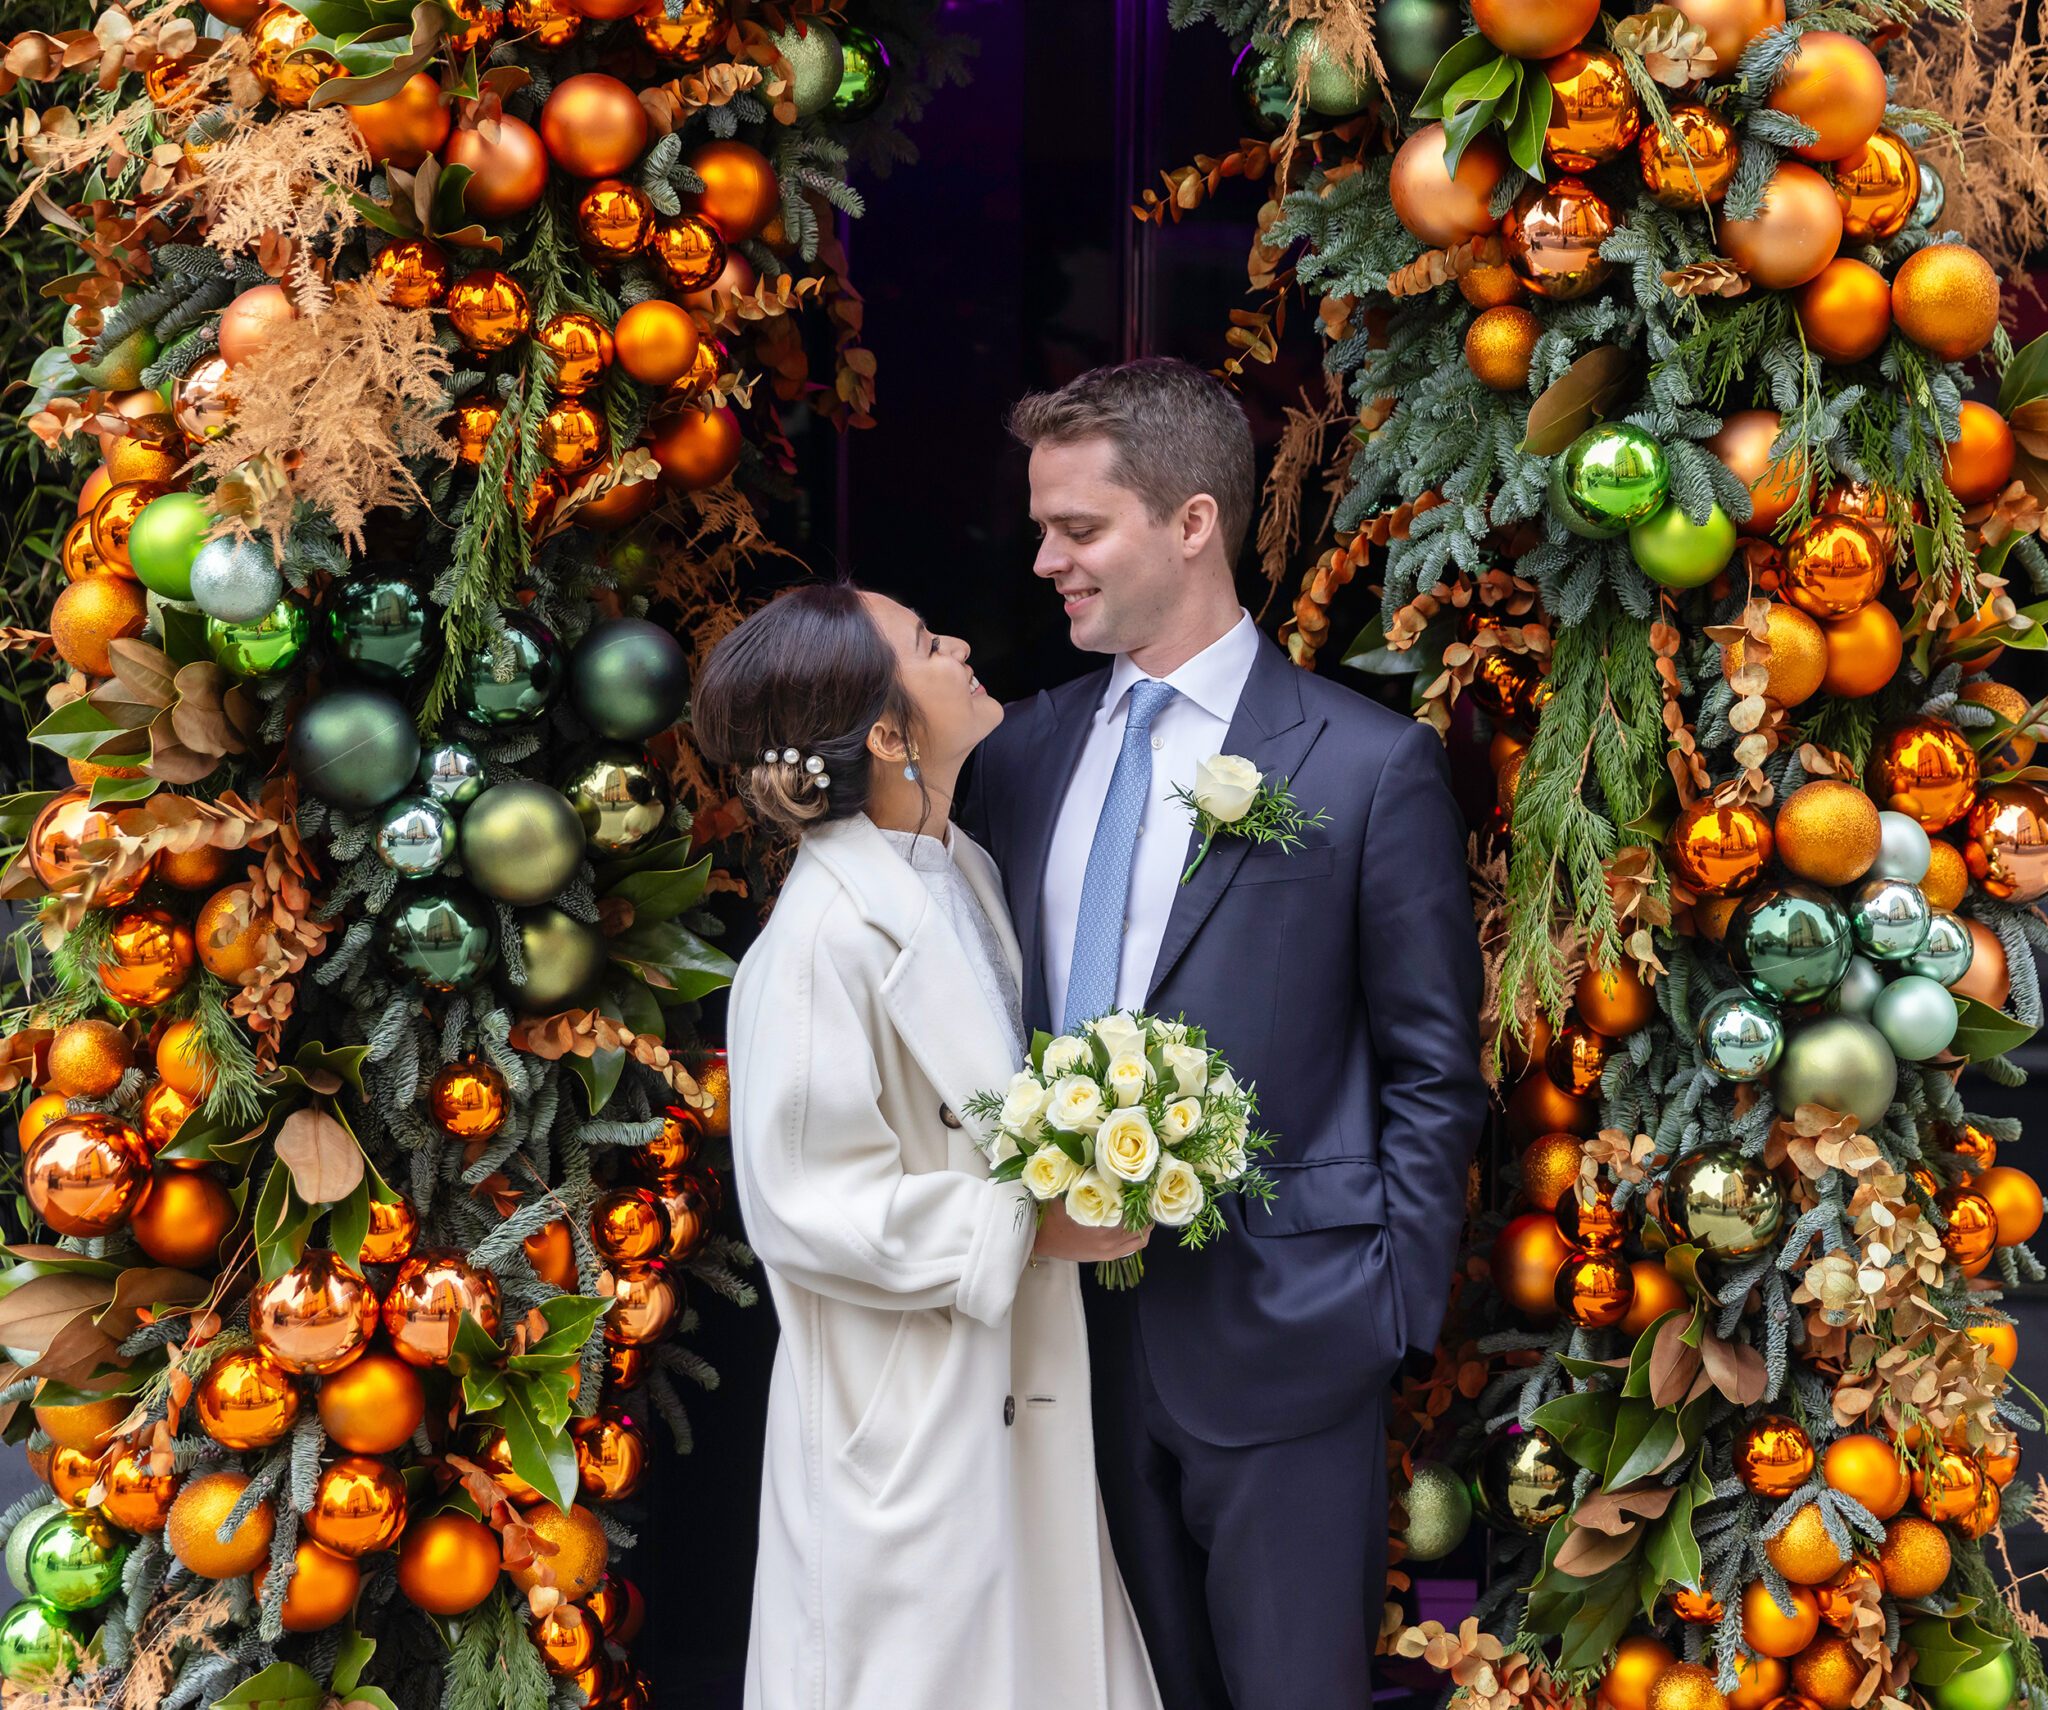 Old Marylebone Town Hall Wedding Couple in Christmas decorations image